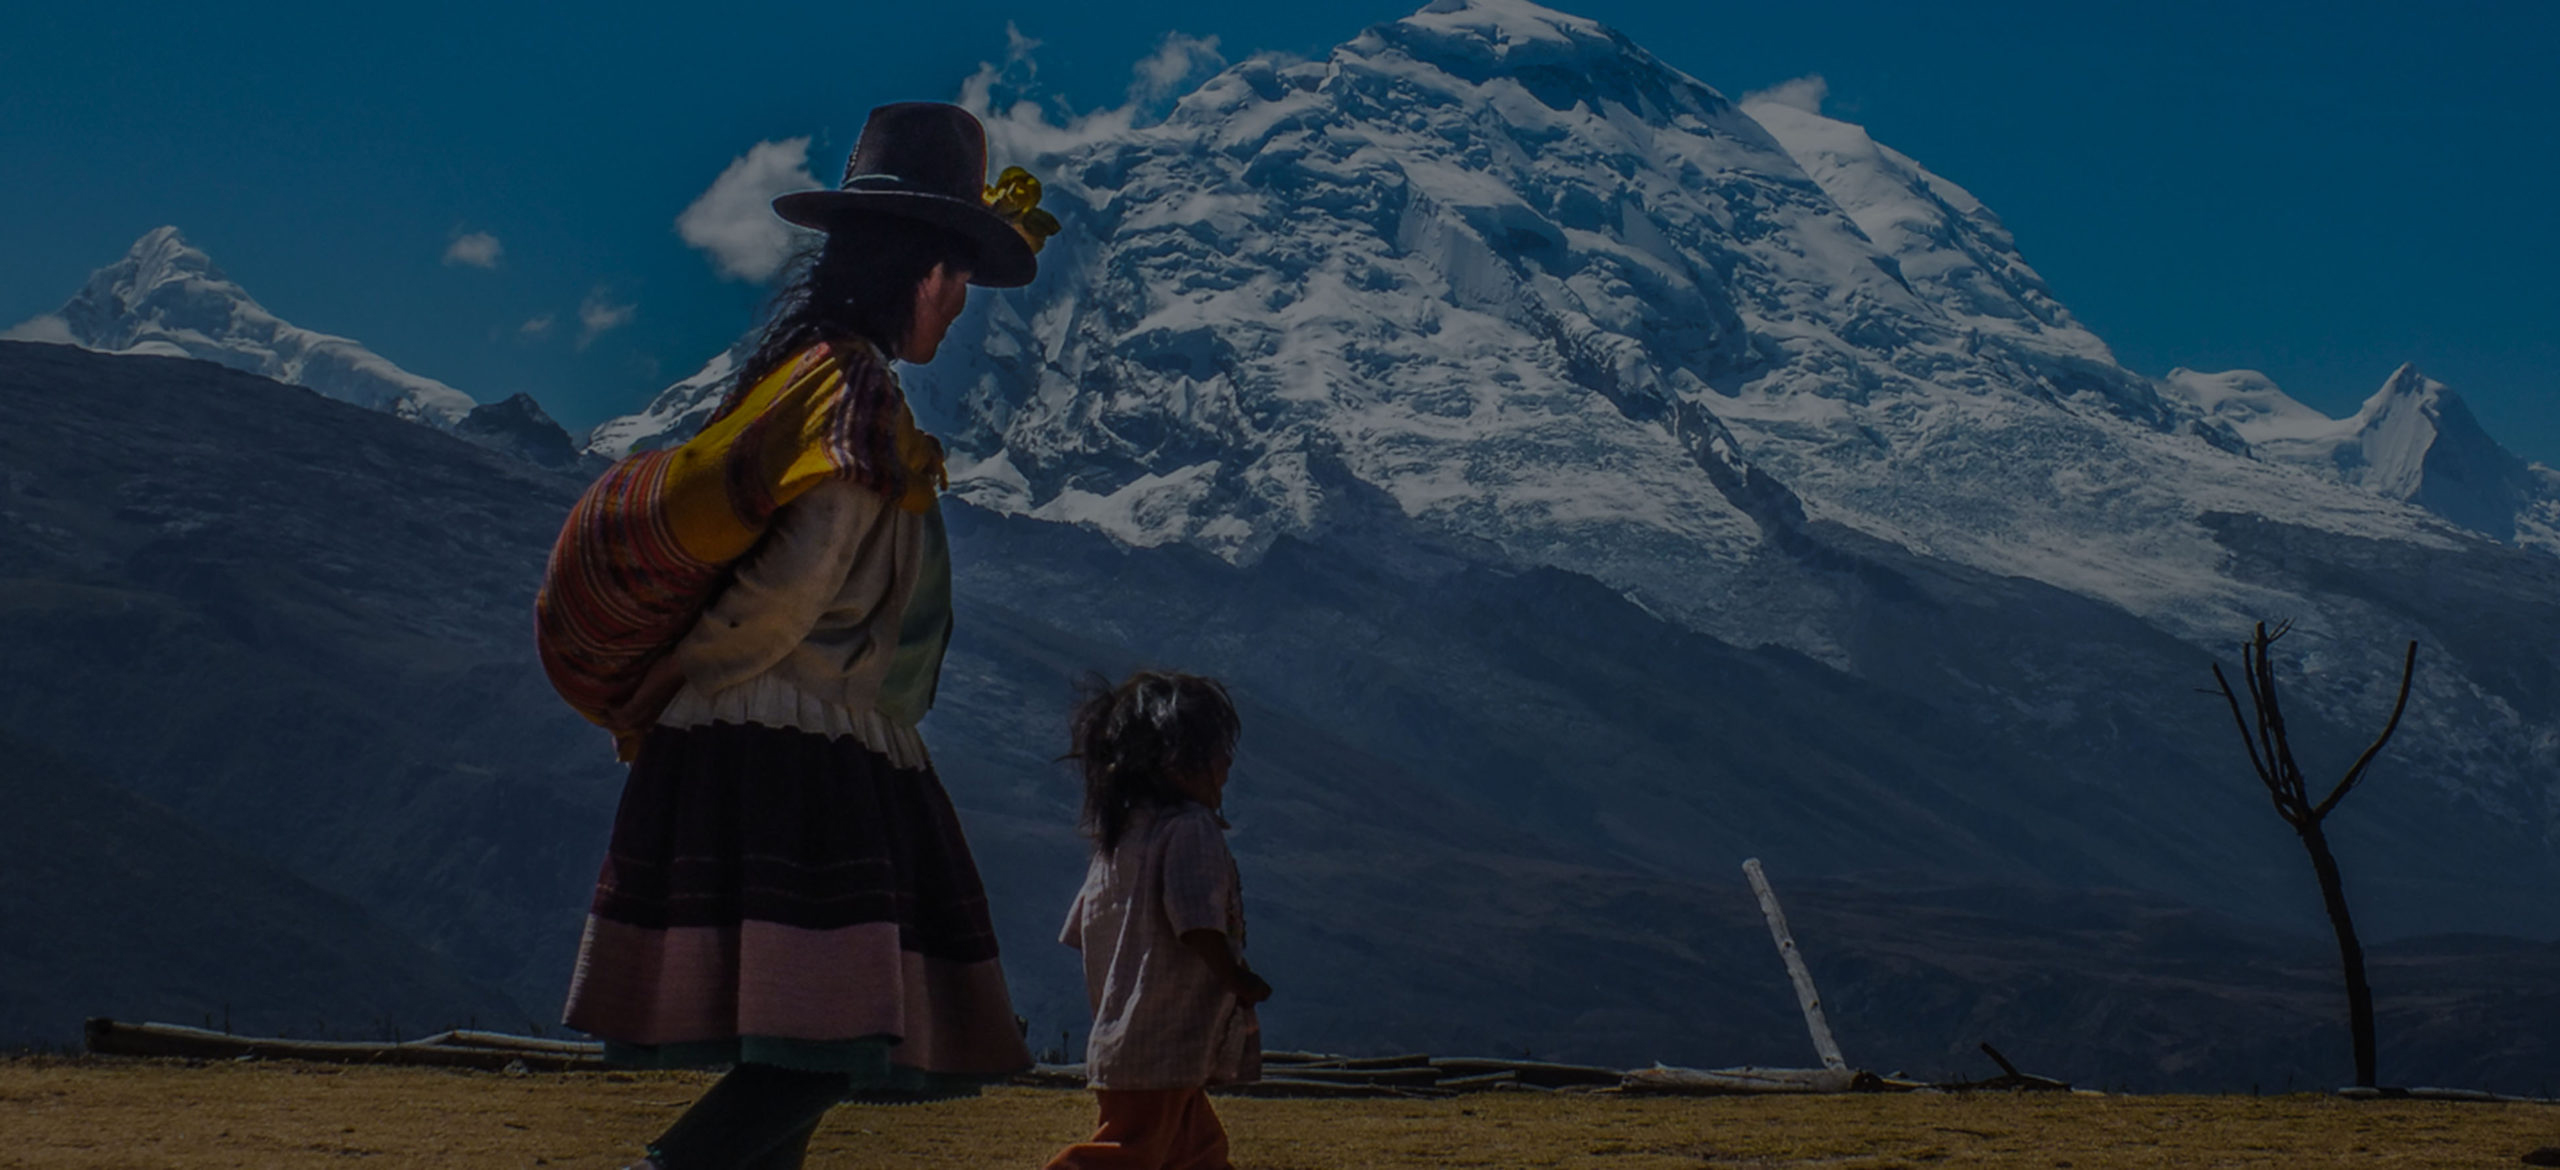 Edson-Vandeira-Peru-Andean-woman-and-child-scaled-1